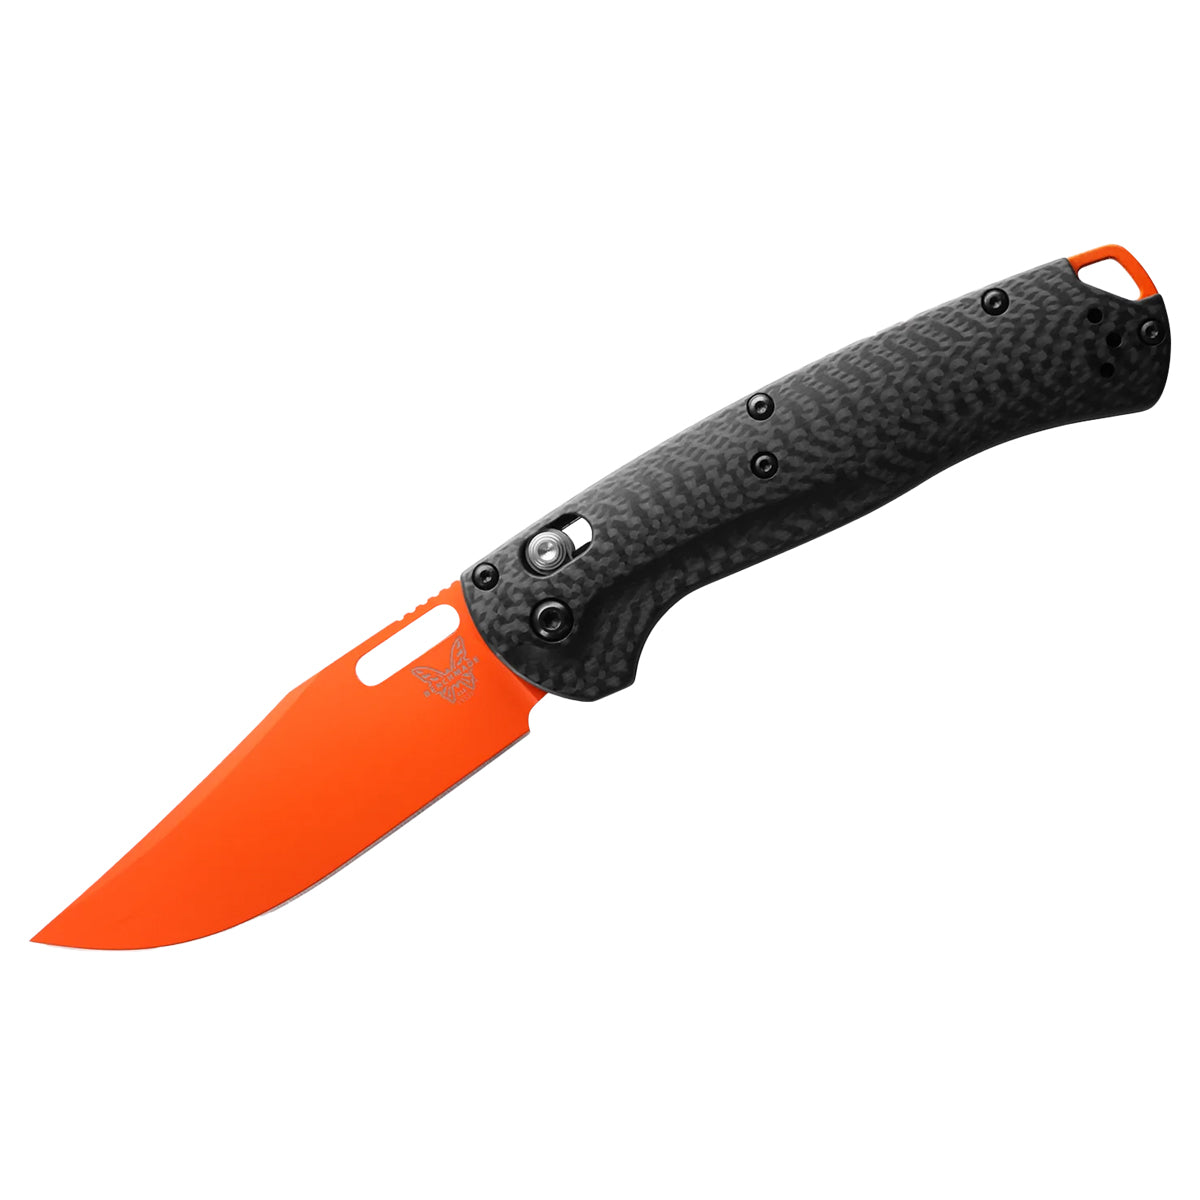 Benchmade Tagged Out Knife in  by GOHUNT | Benchmade - GOHUNT Shop